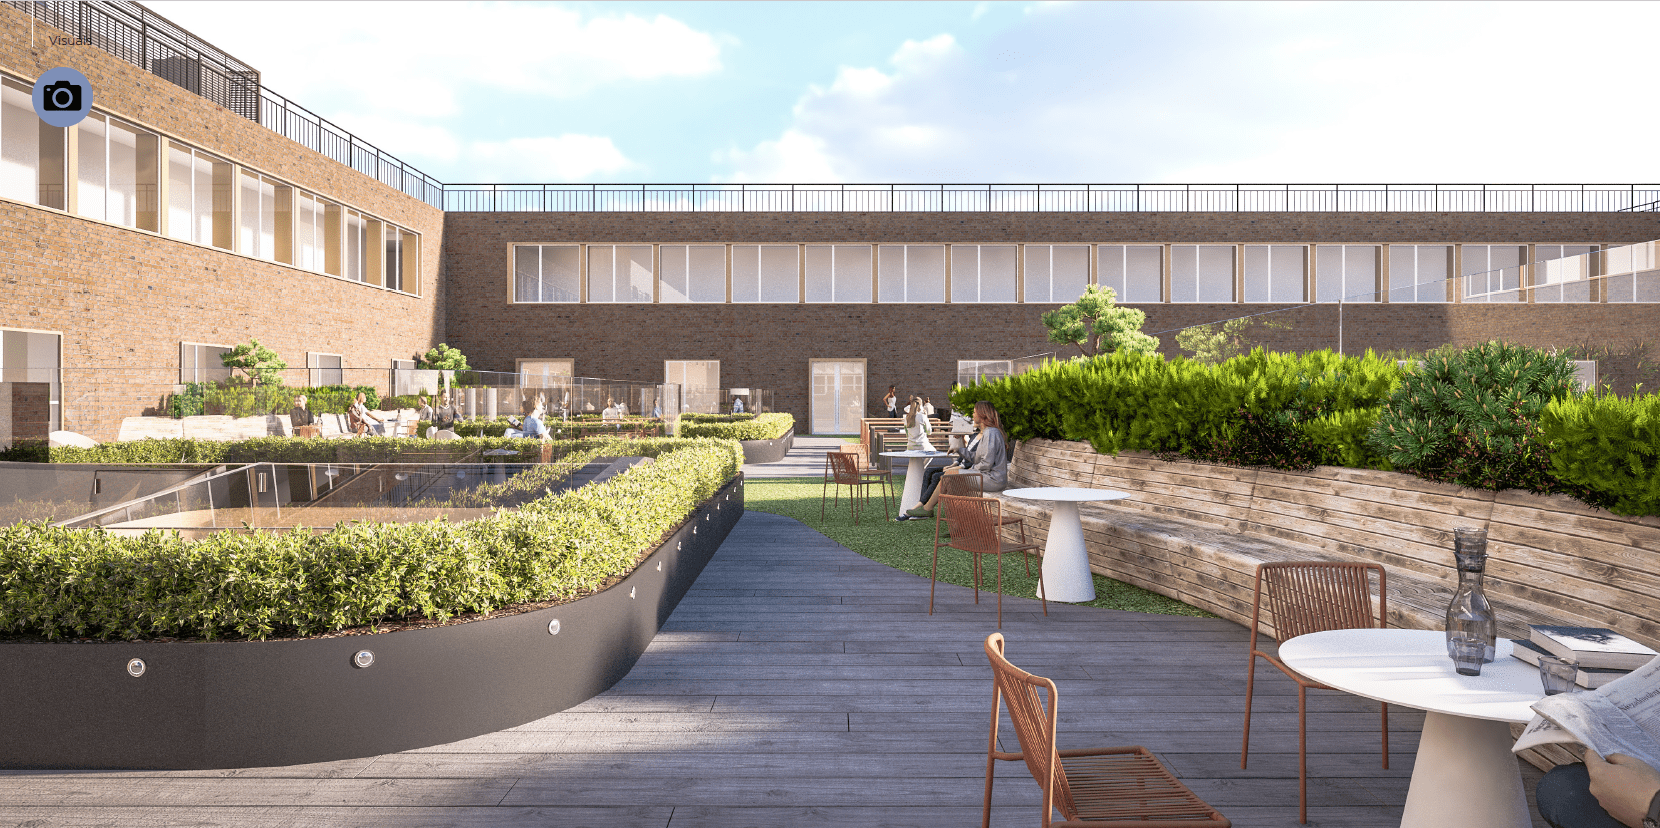 Concept visual of the new Roof Garden